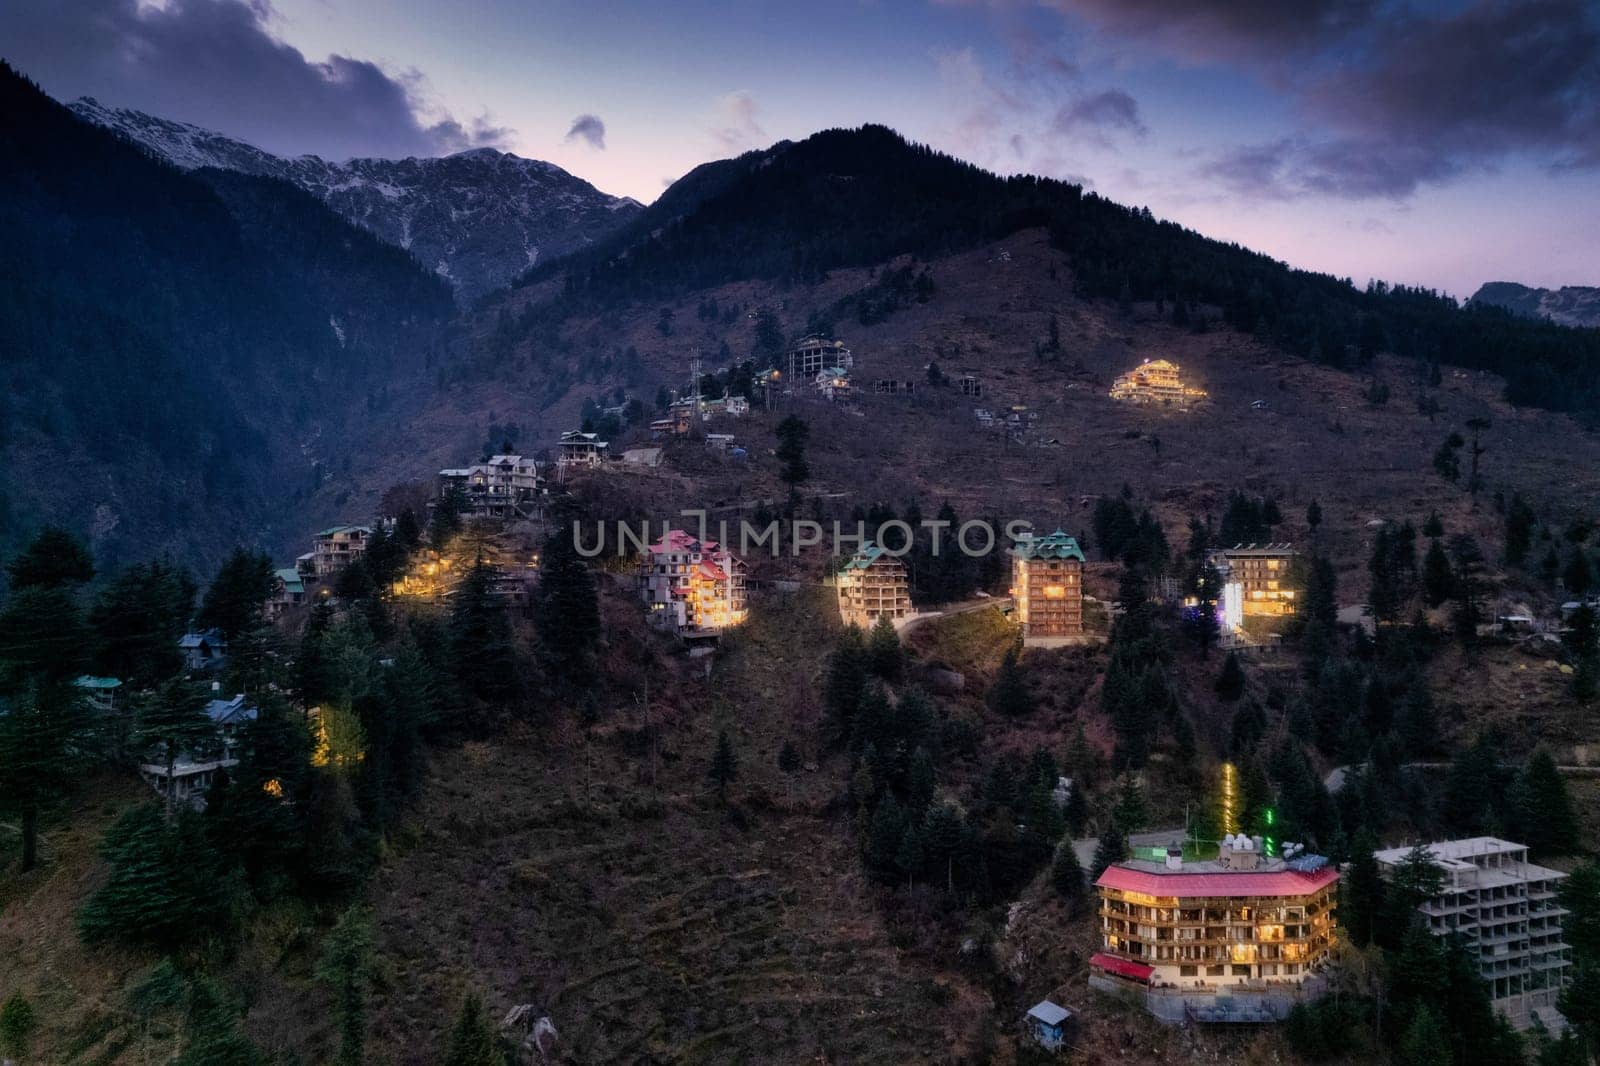 aerial drone landing shot showing lit multi floor story buildings on side of hill at night evening showing hotels shopping areas in manali, shimla himachal by Shalinimathur